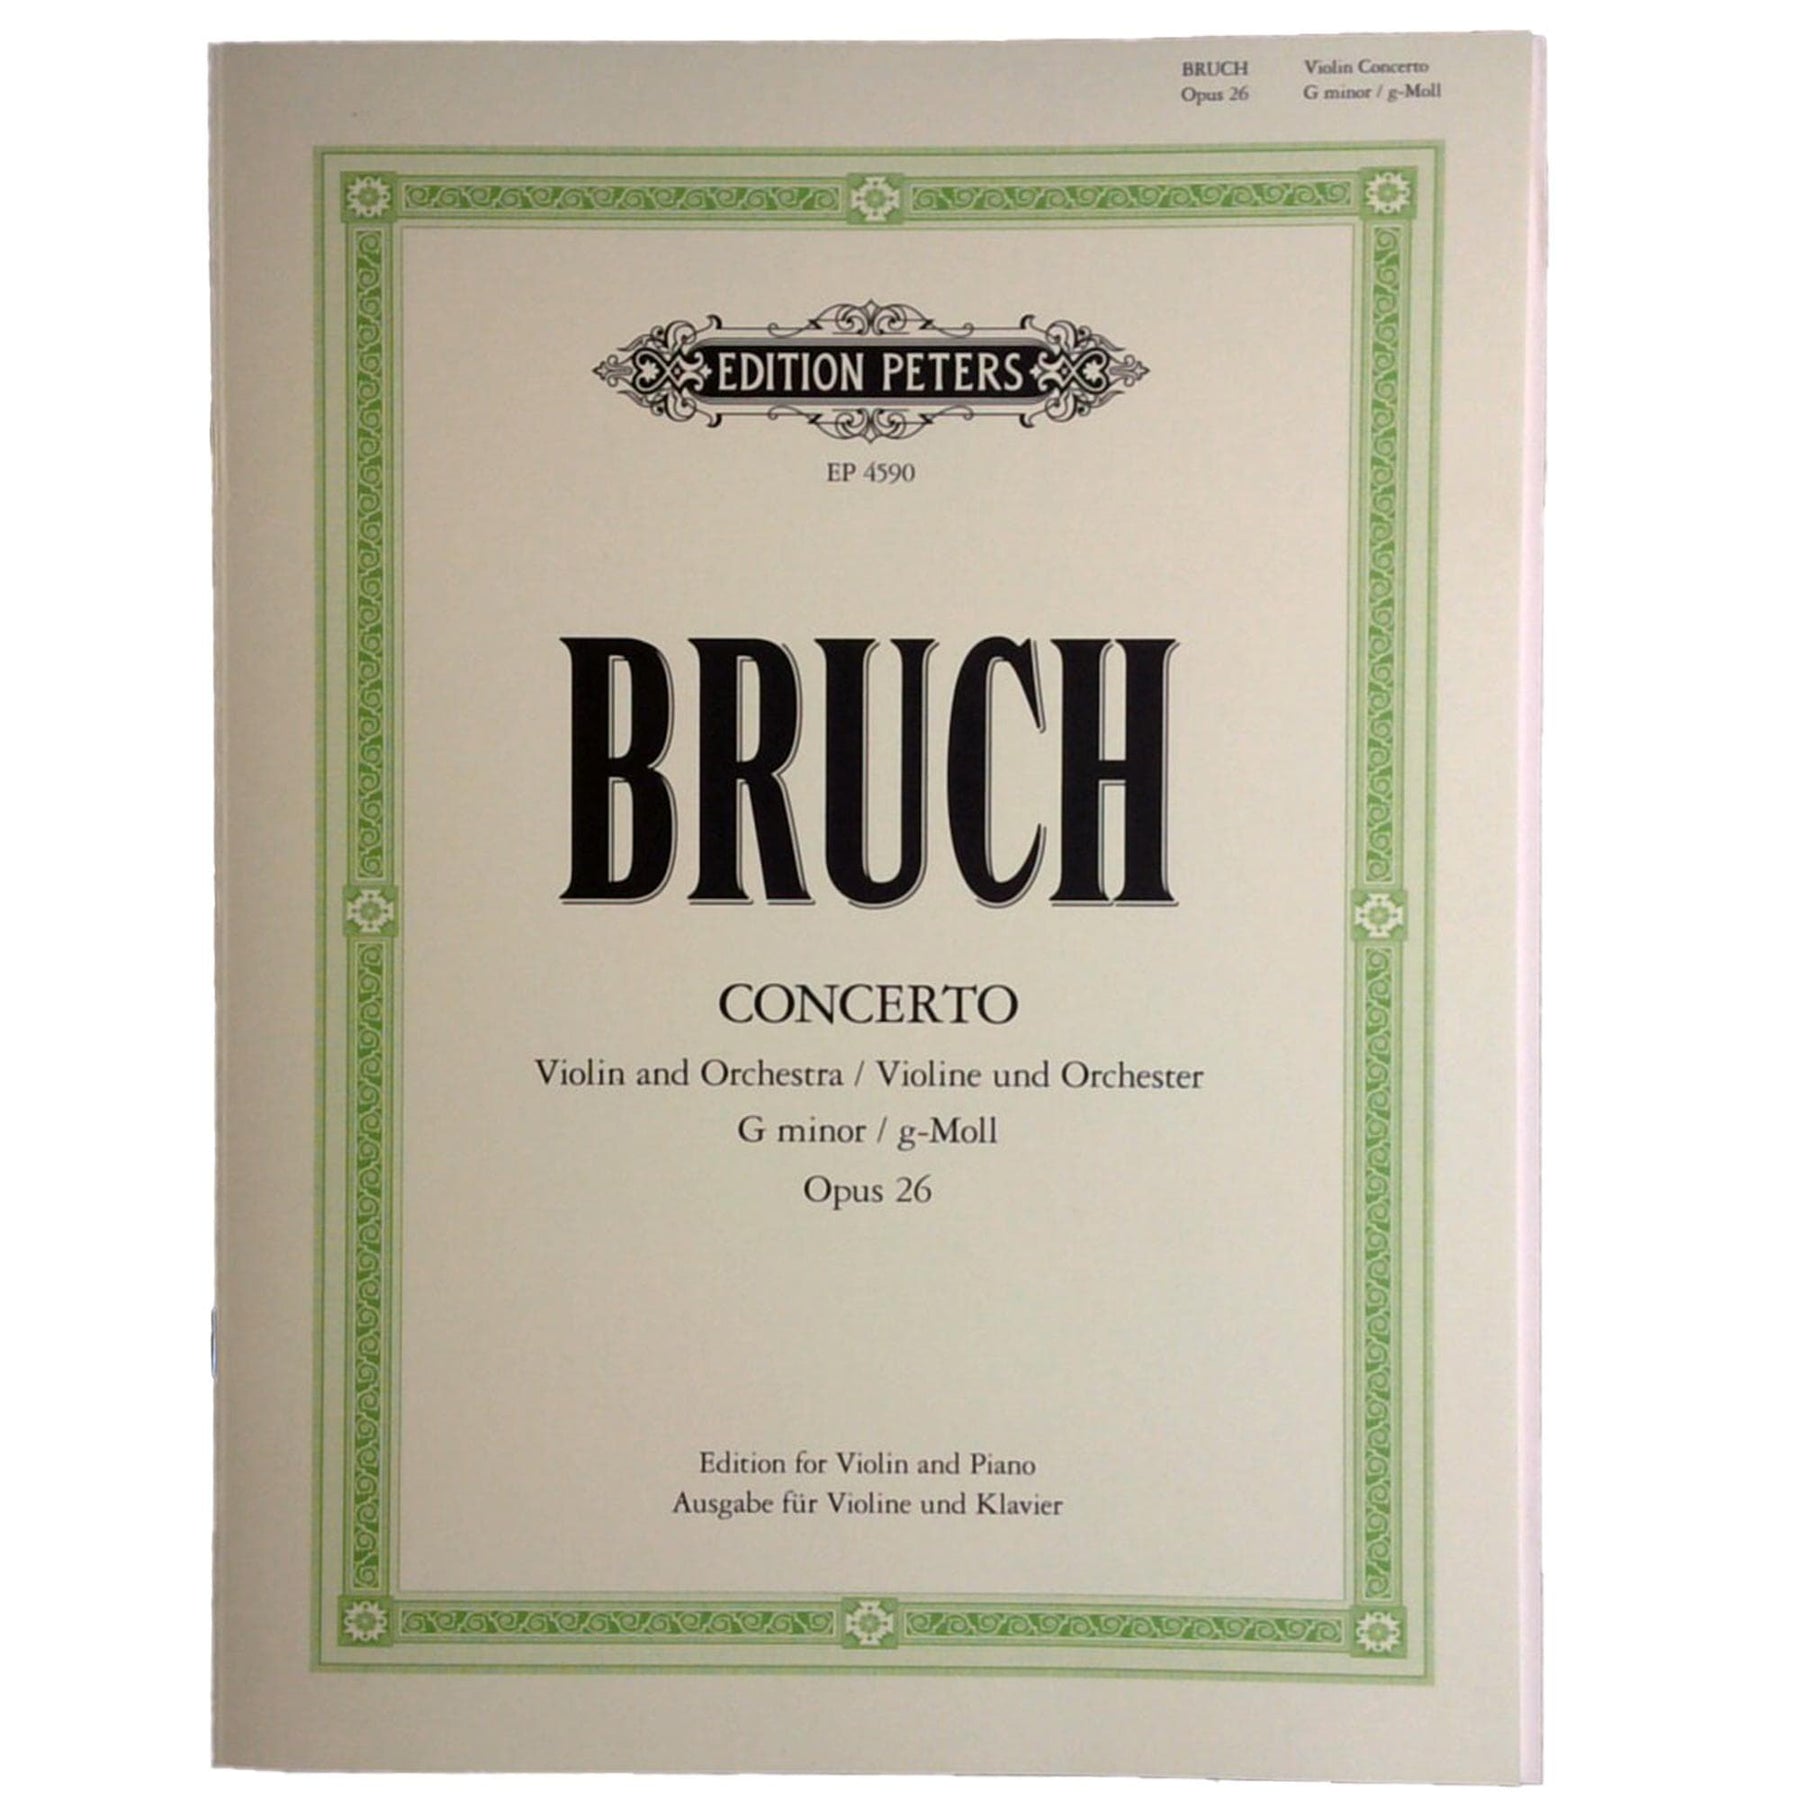 Bruch, Max - Concerto No 1 in G Minor, Op 26 - for Violin and Piano - arranged by Joseph Joachim - Peters